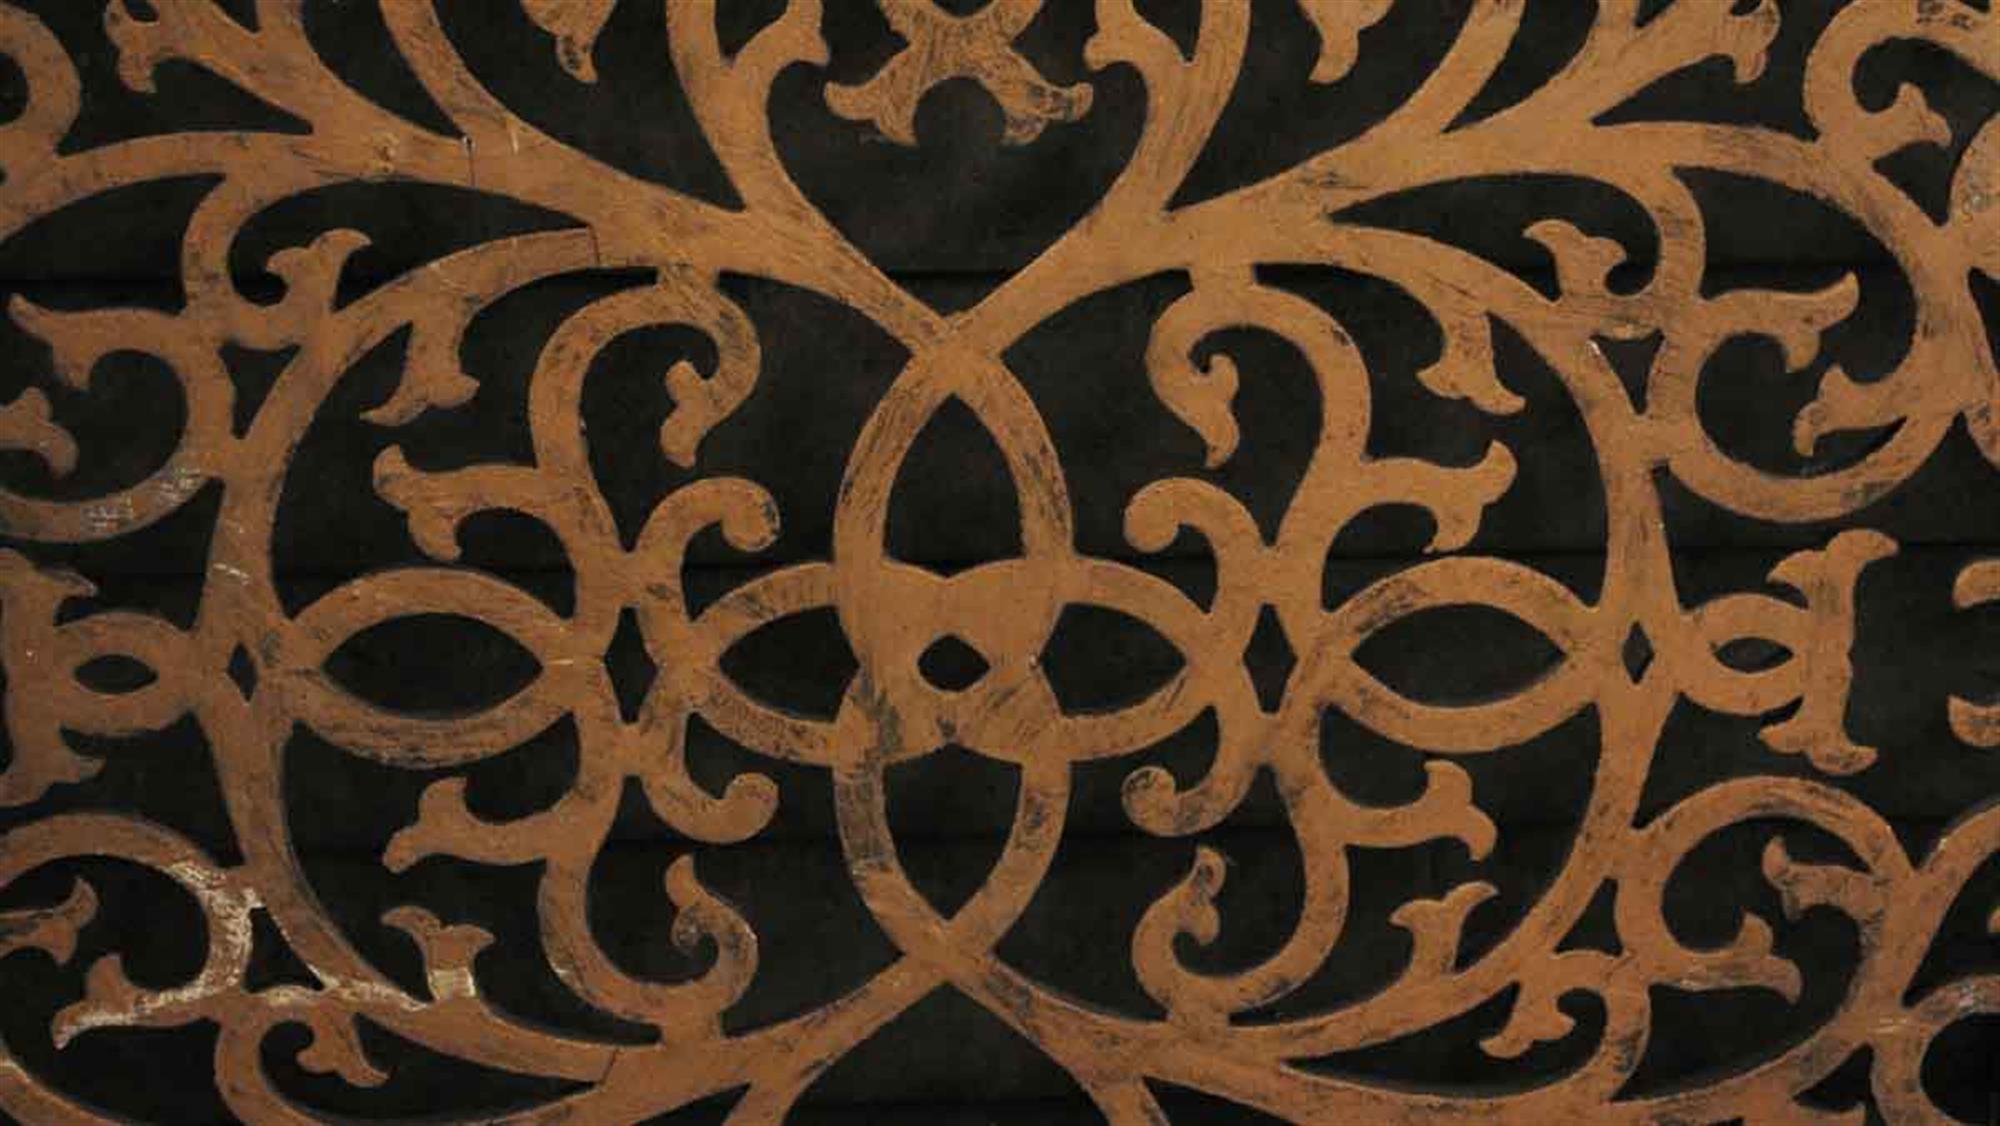 Decorative cast iron vent cover or floor grill from 1910. This can be seen at our 2420 Broadway location on the upper west side in Manhattan.